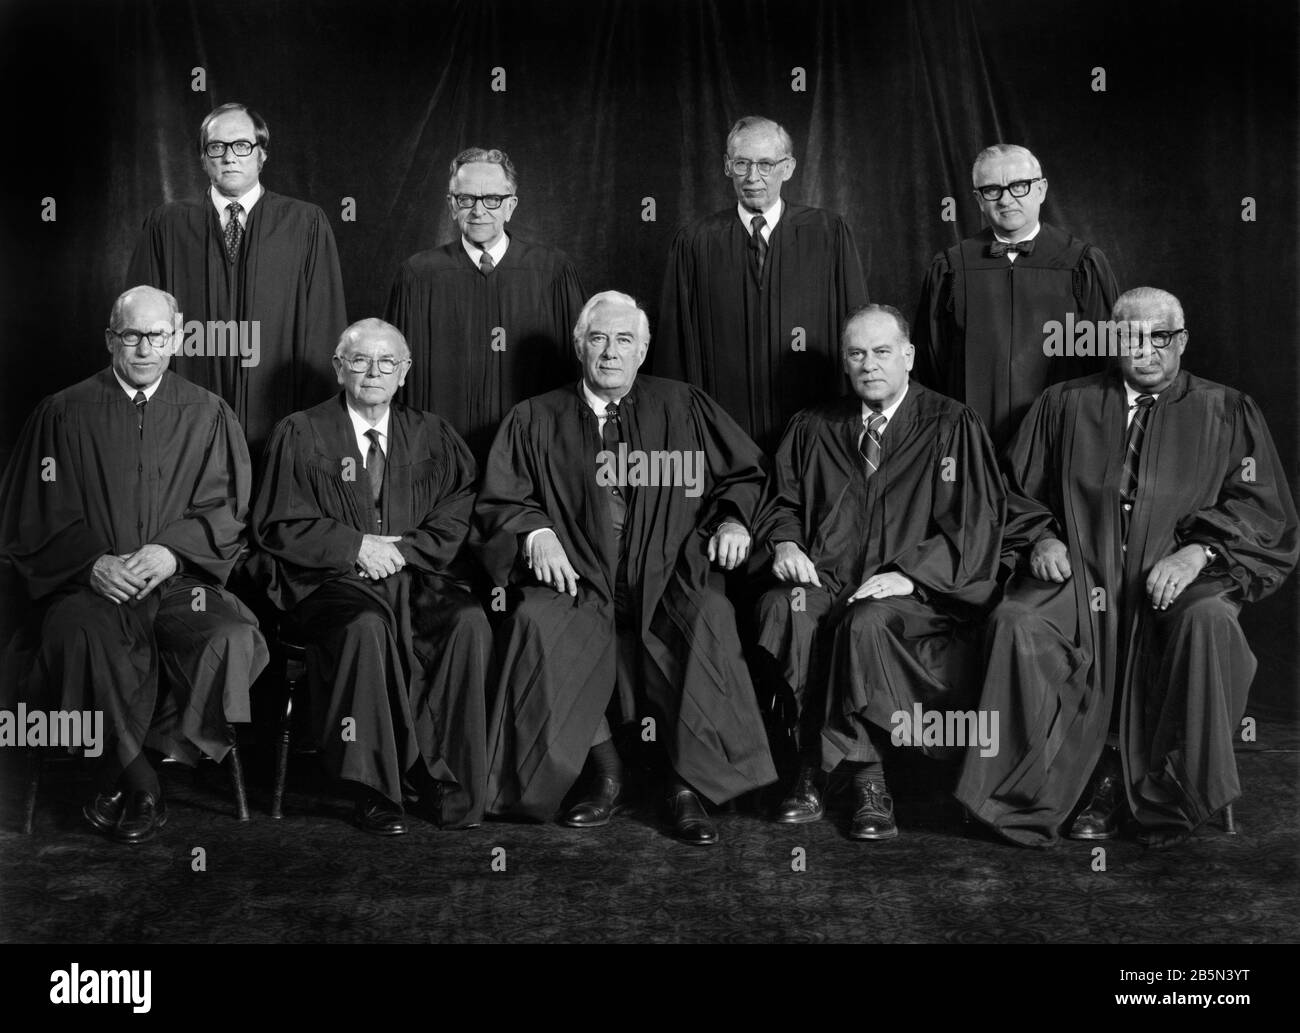 Supreme Court of the United States, Group portrait of Justices William J. Brennan, Jr., Byron R. White, Harry A. Blackmun, William H. Rehnquist, Potter Stewart, Thurgood Marshall, Lewis F. Powell, Jr., John Paul Stevens, III, and Chief Justice Warren E. Burger, Washington, D.C., USA, photograph by Robert S. Oakes, 1976 Stock Photo